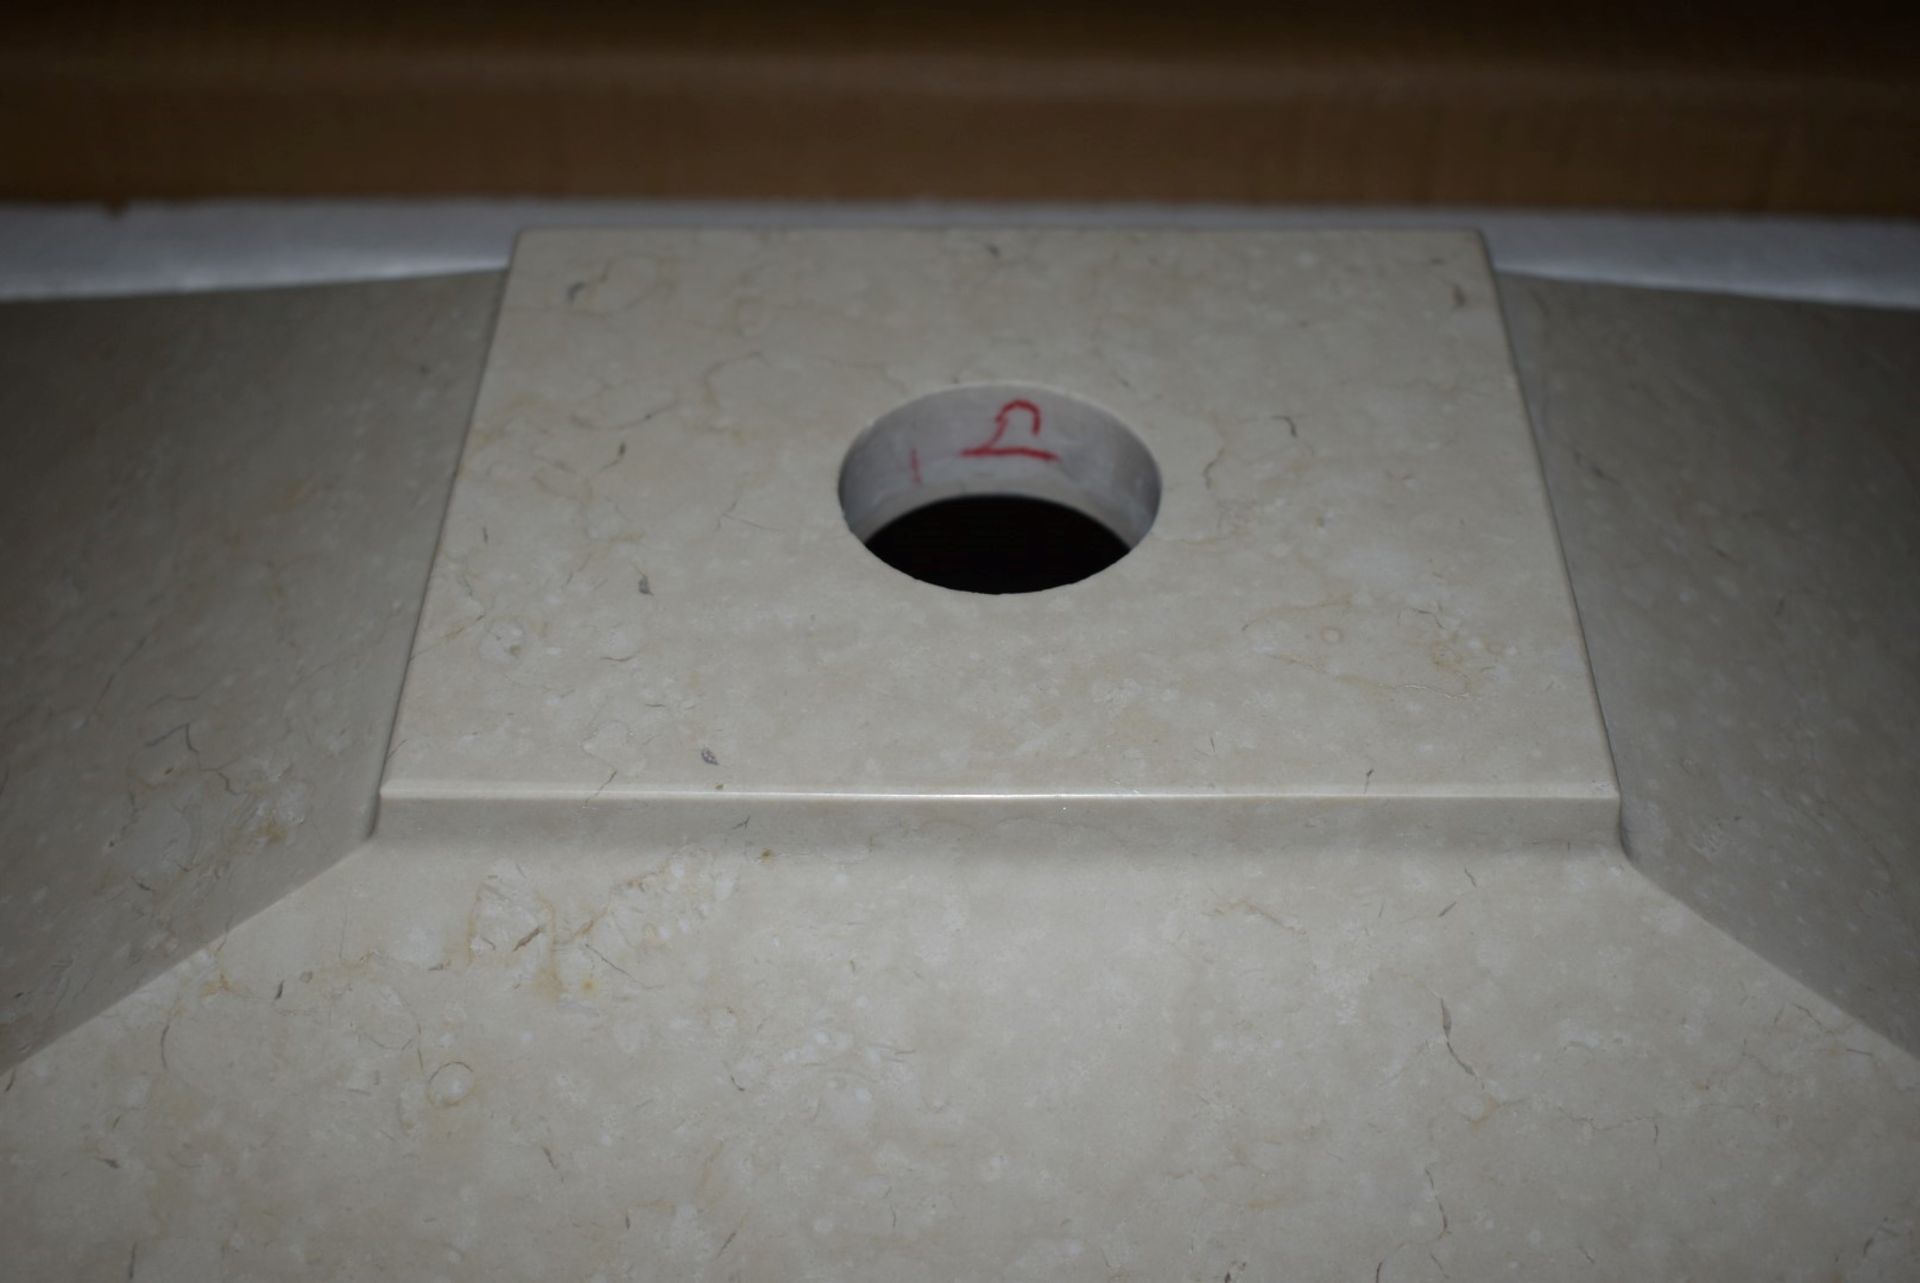 1 x Stonearth 'Karo' Solid Galala Marble Stone Countertop Sink Basin - New Boxed Stock - Image 8 of 8